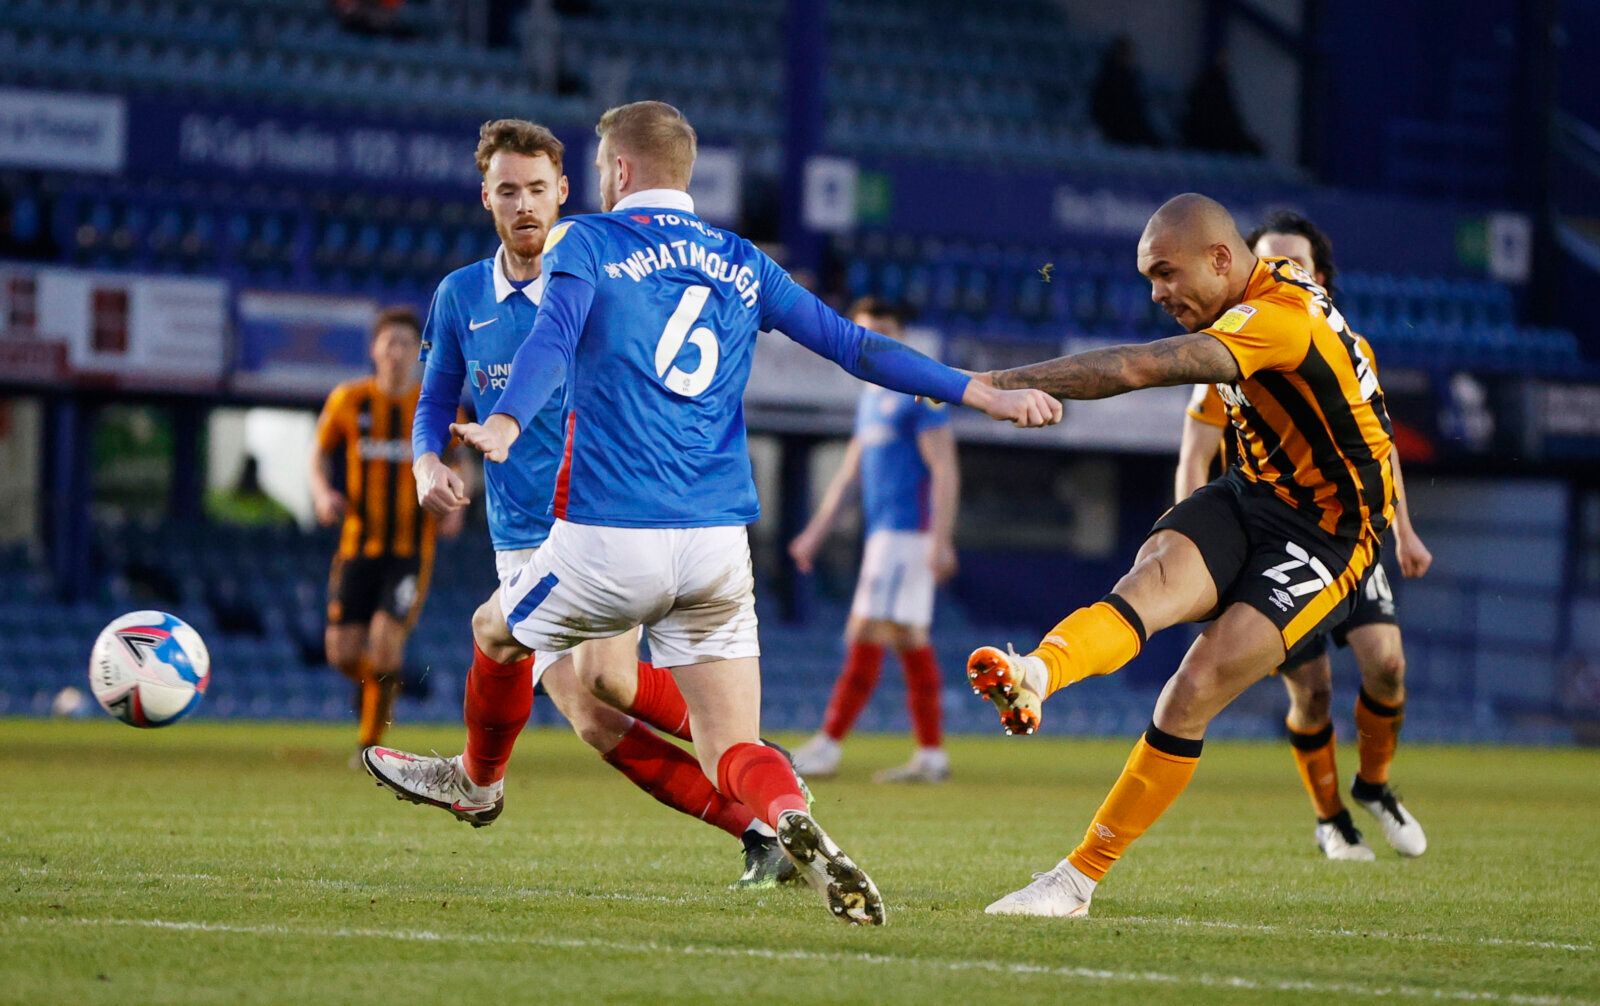 Soccer Football - League One - Portsmouth v Hull City - Fratton Park, Portsmouth, Britain - January 23, 2021 Hull City's Josh Magennis scores their fourth goal Action Images/John Sibley EDITORIAL USE ONLY. No use with unauthorized audio, video, data, fixture lists, club/league logos or 'live' services. Online in-match use limited to 75 images, no video emulation. No use in betting, games or single club /league/player publications.  Please contact your account representative for further details.